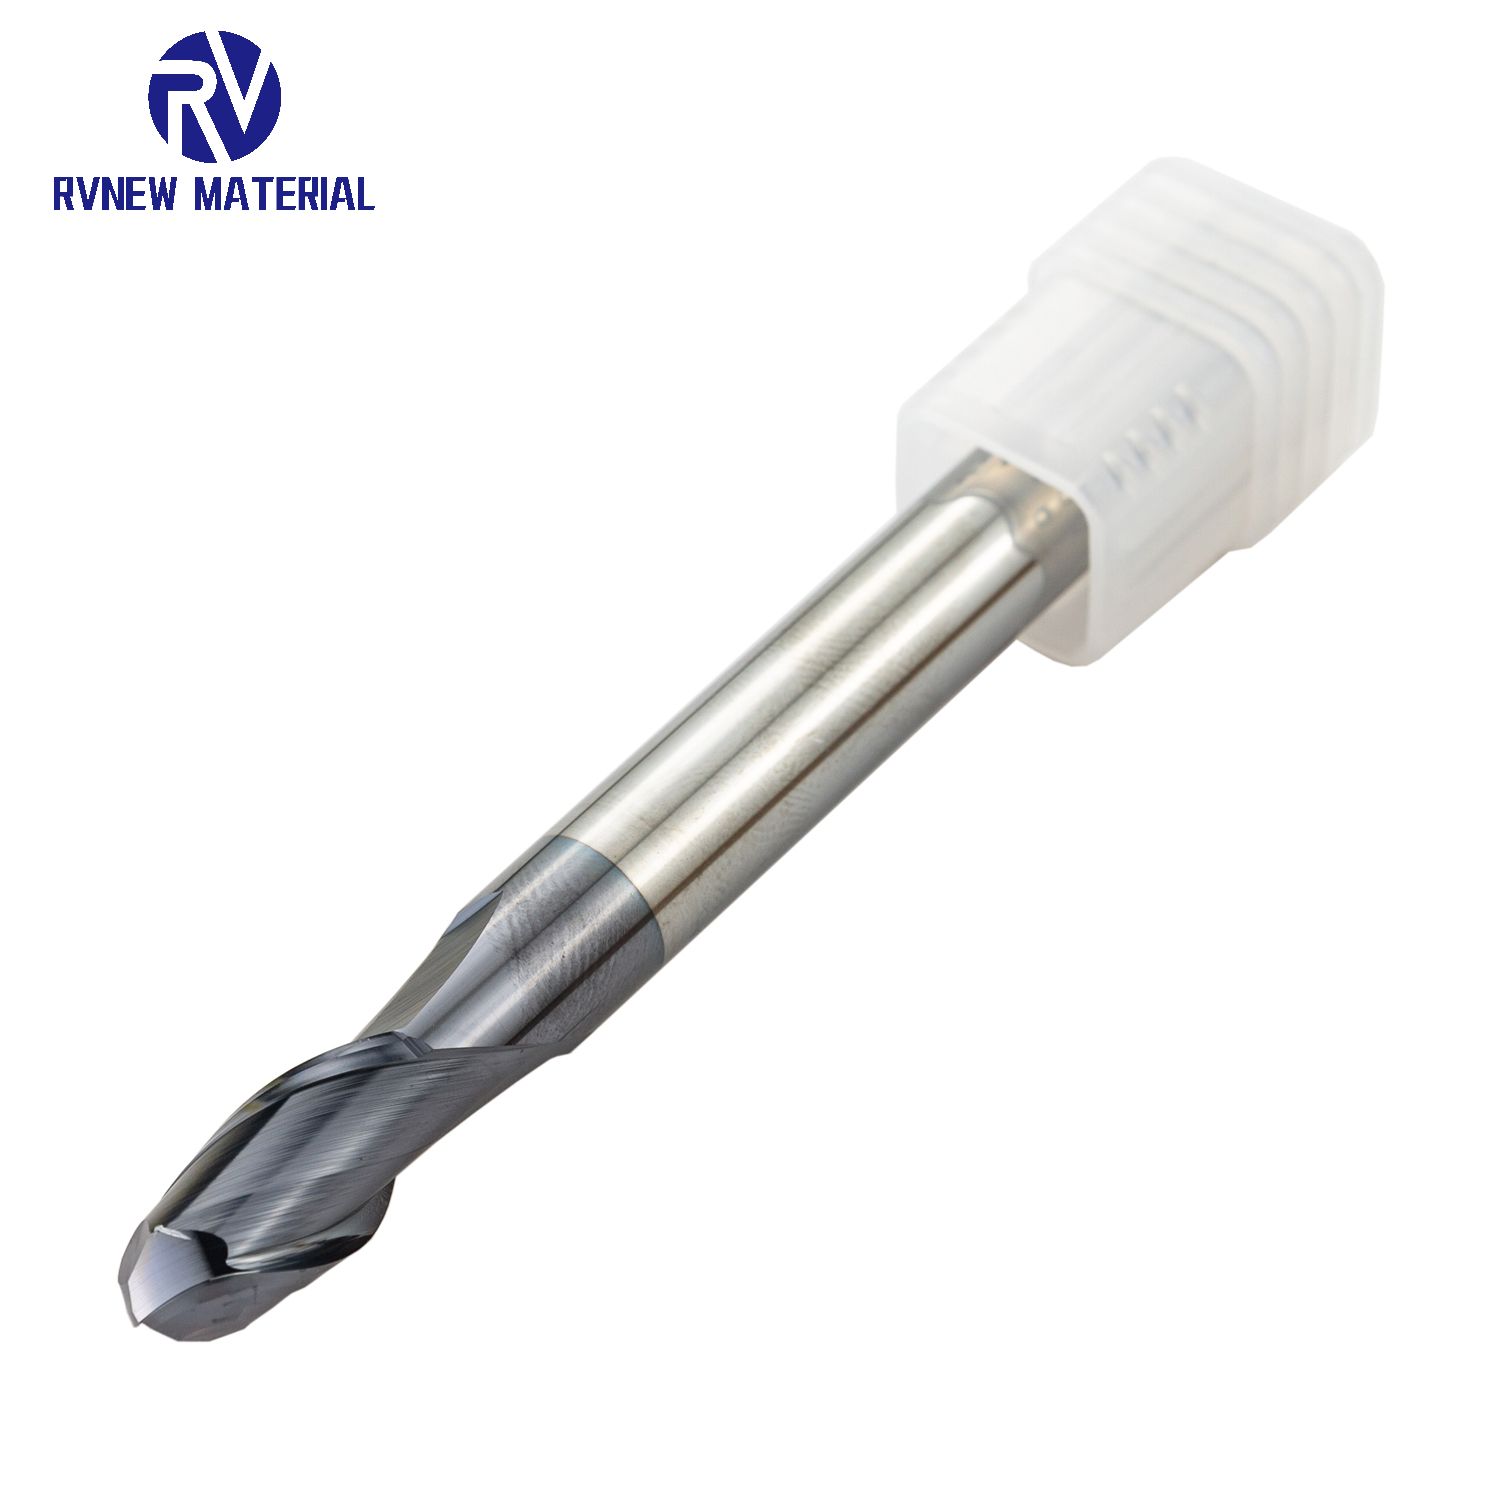 Ball nose mill cnc end mill carbide Milling Cutter equipment tool 